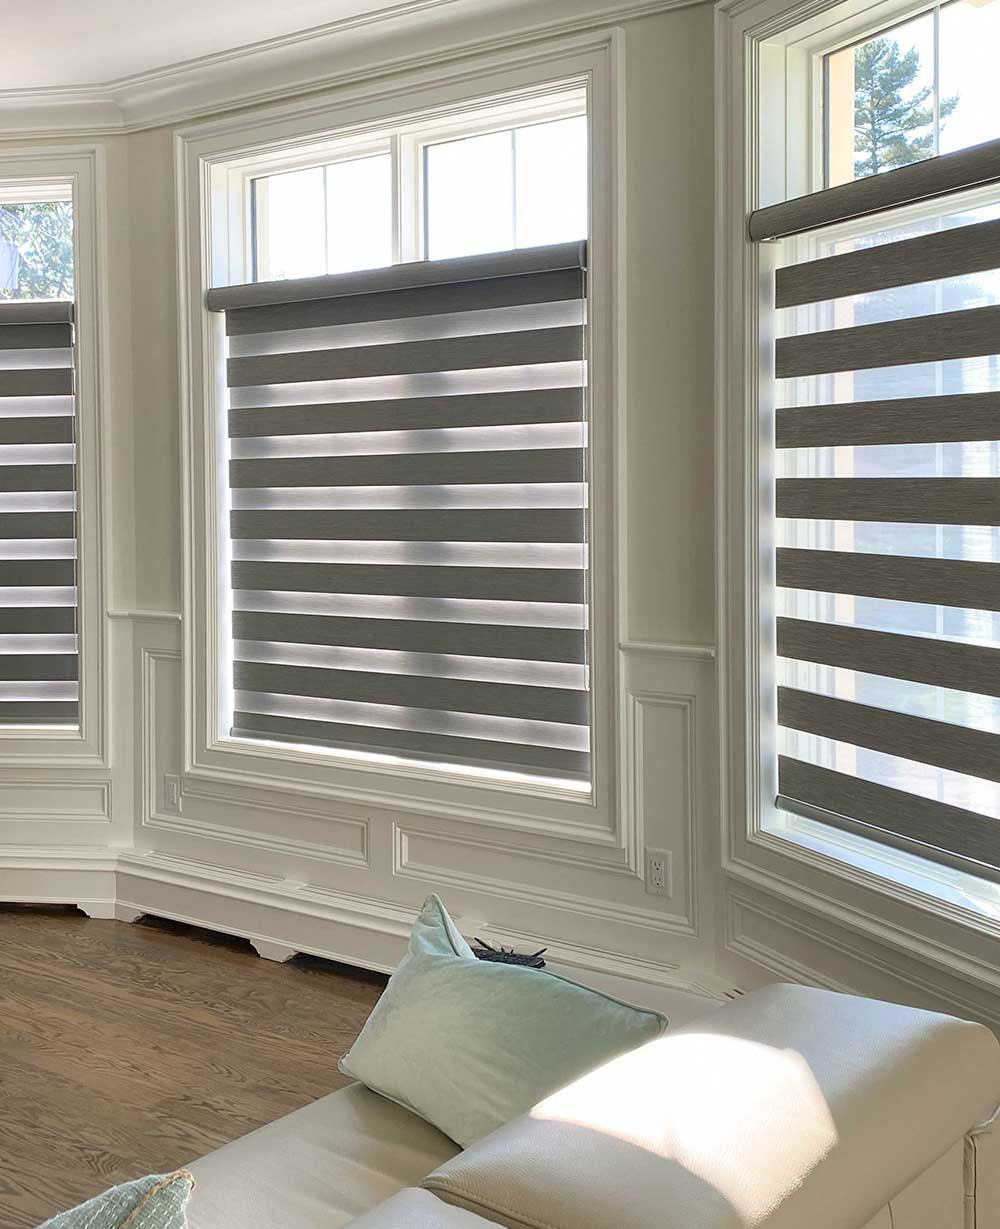 Custom Shades, Blinds & Drapes  Window Coverings - Blinds To Go